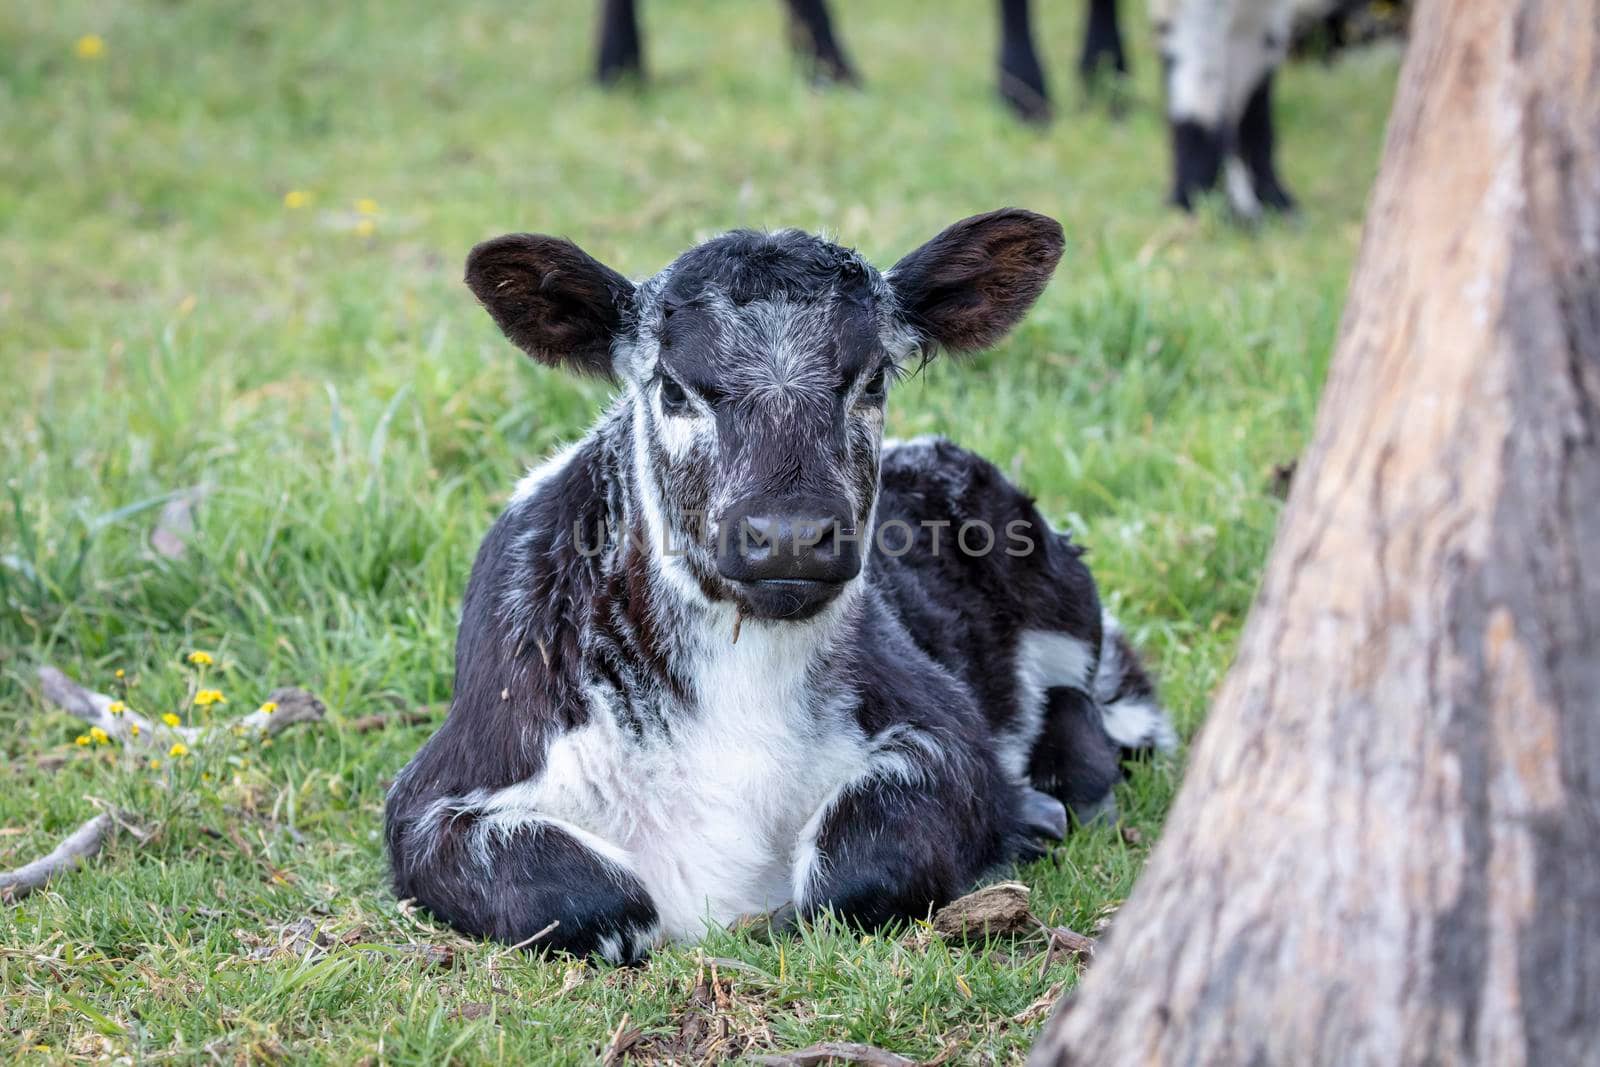 A black and white calf sitting on the ground in a green pasture in regional Australia by WittkePhotos